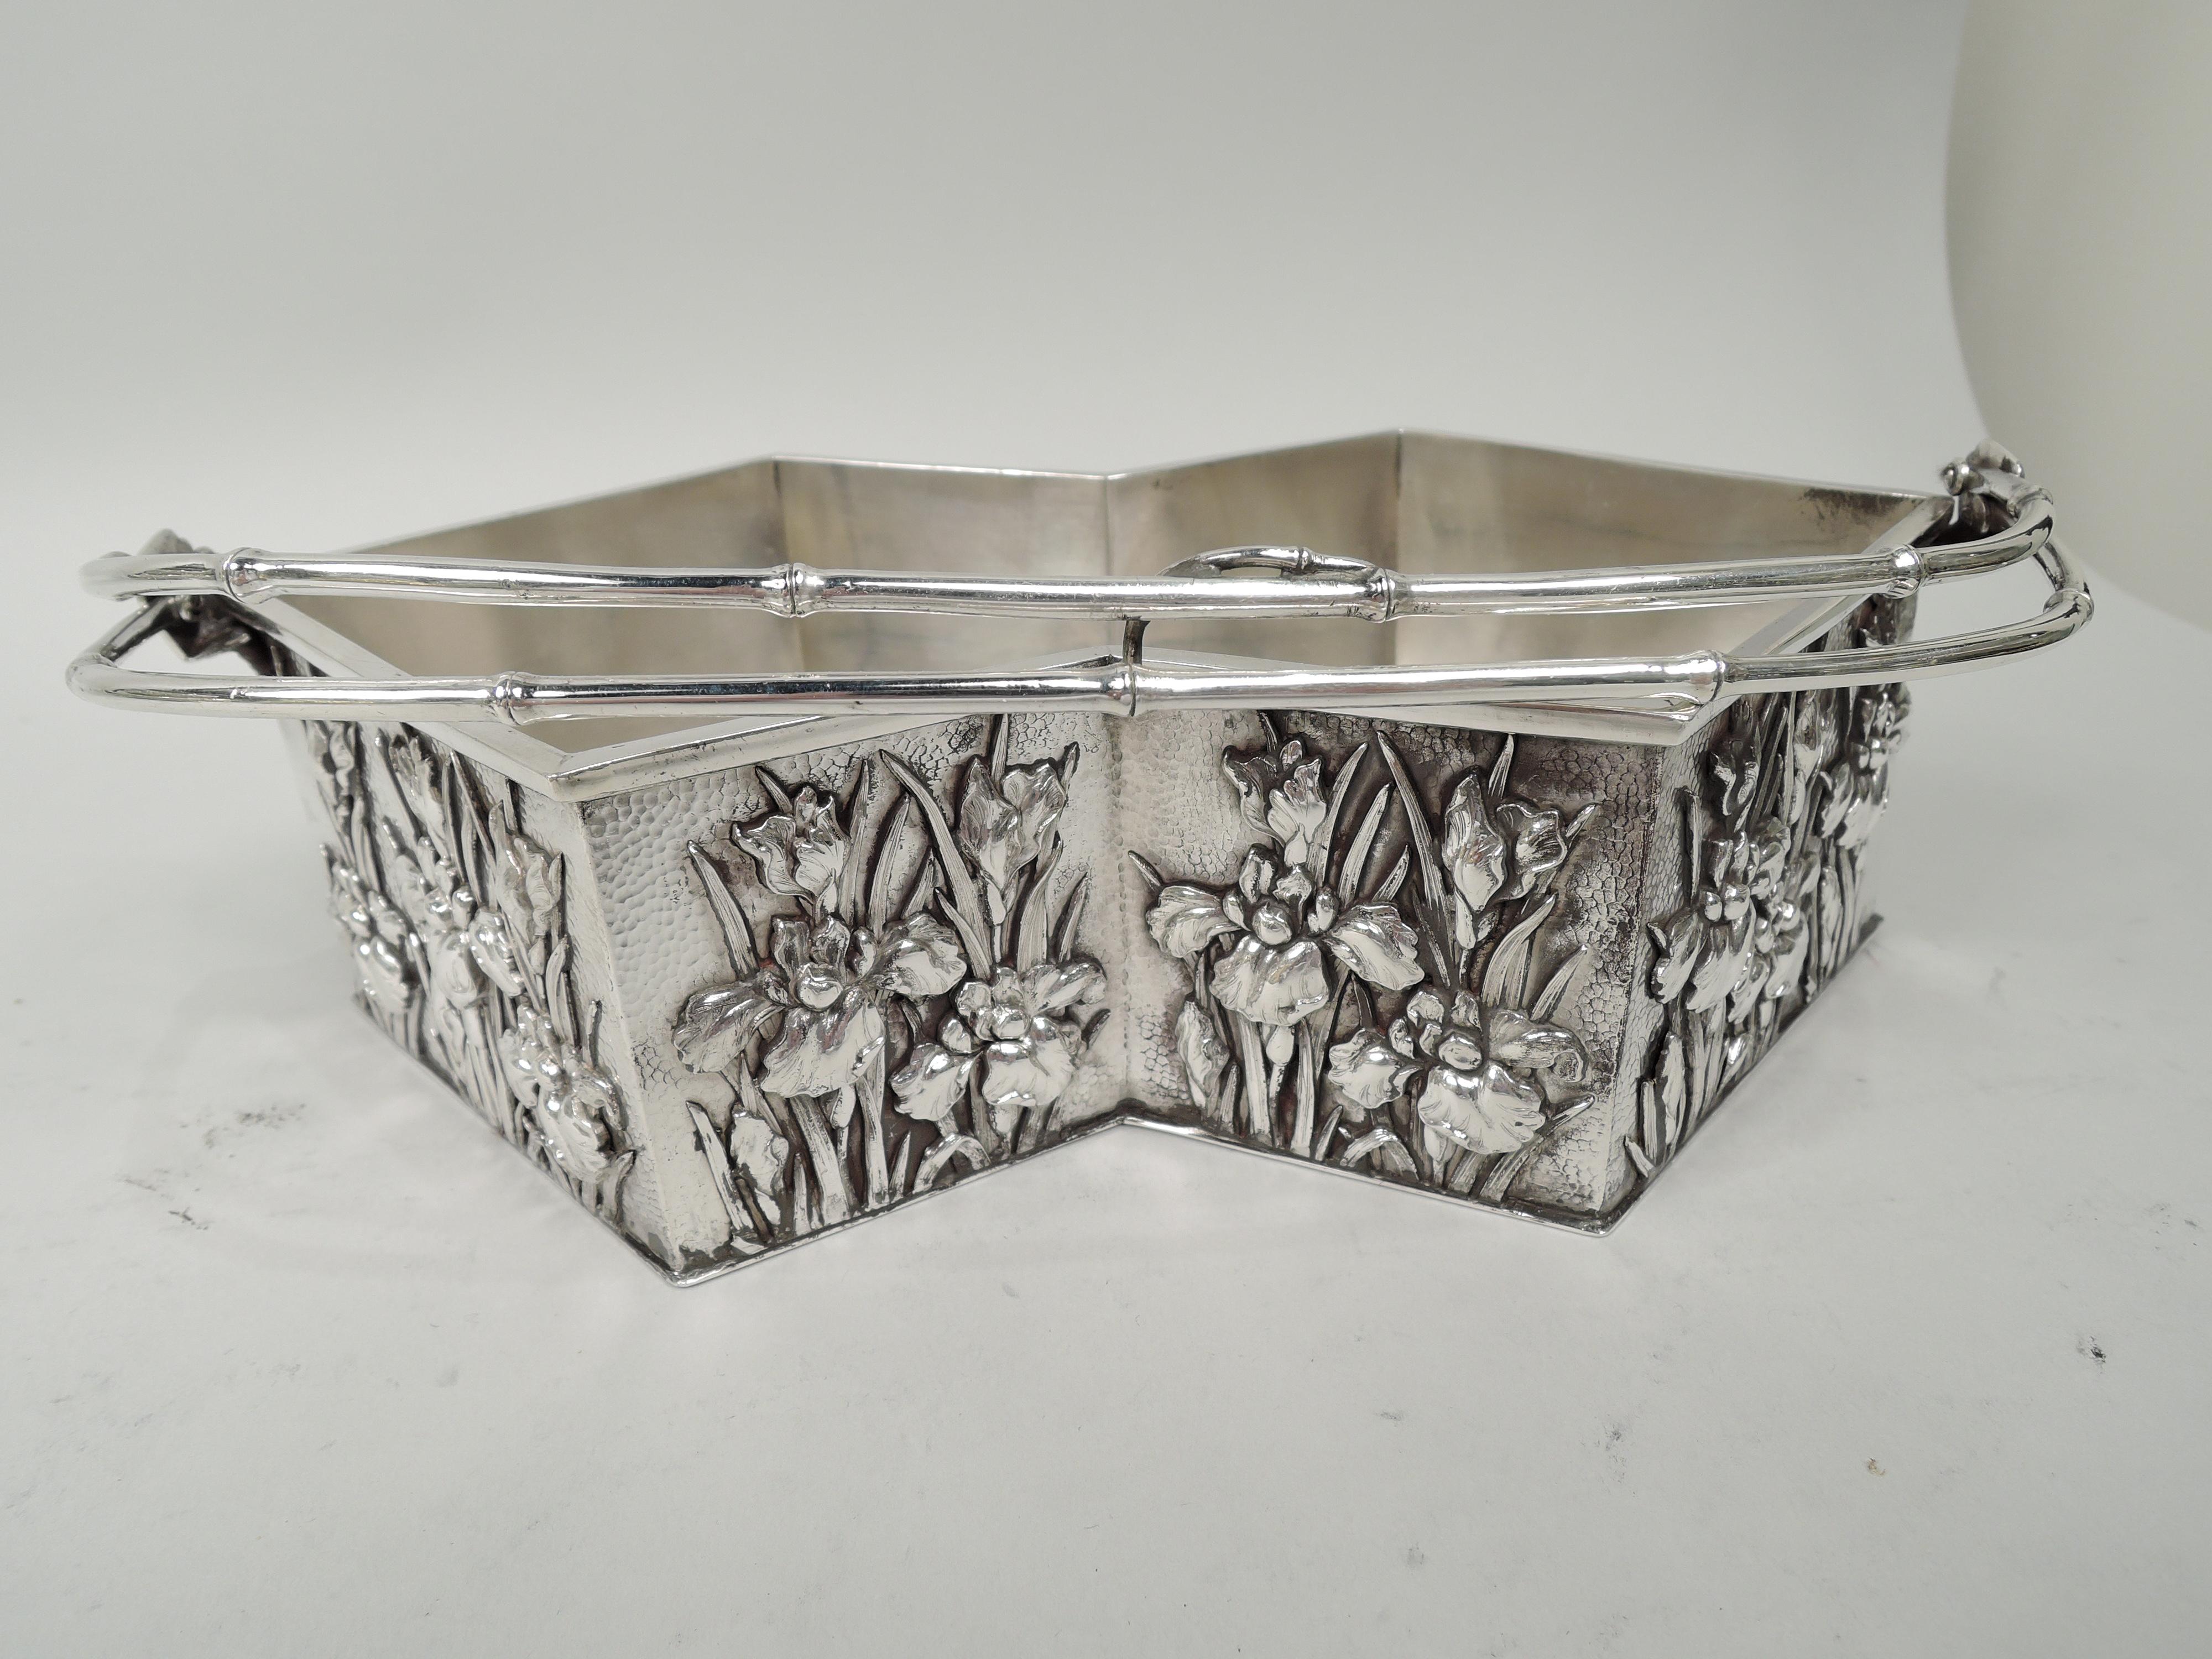 Japanese Meiji Art Nouveau silver basket, ca 1890. Faceted zigzag bowl with convex ends and concave sides, and double bamboo-style swing handle. Sides have applied iris flowers on stippled ground. Marked. Weight: 13 troy ounces.